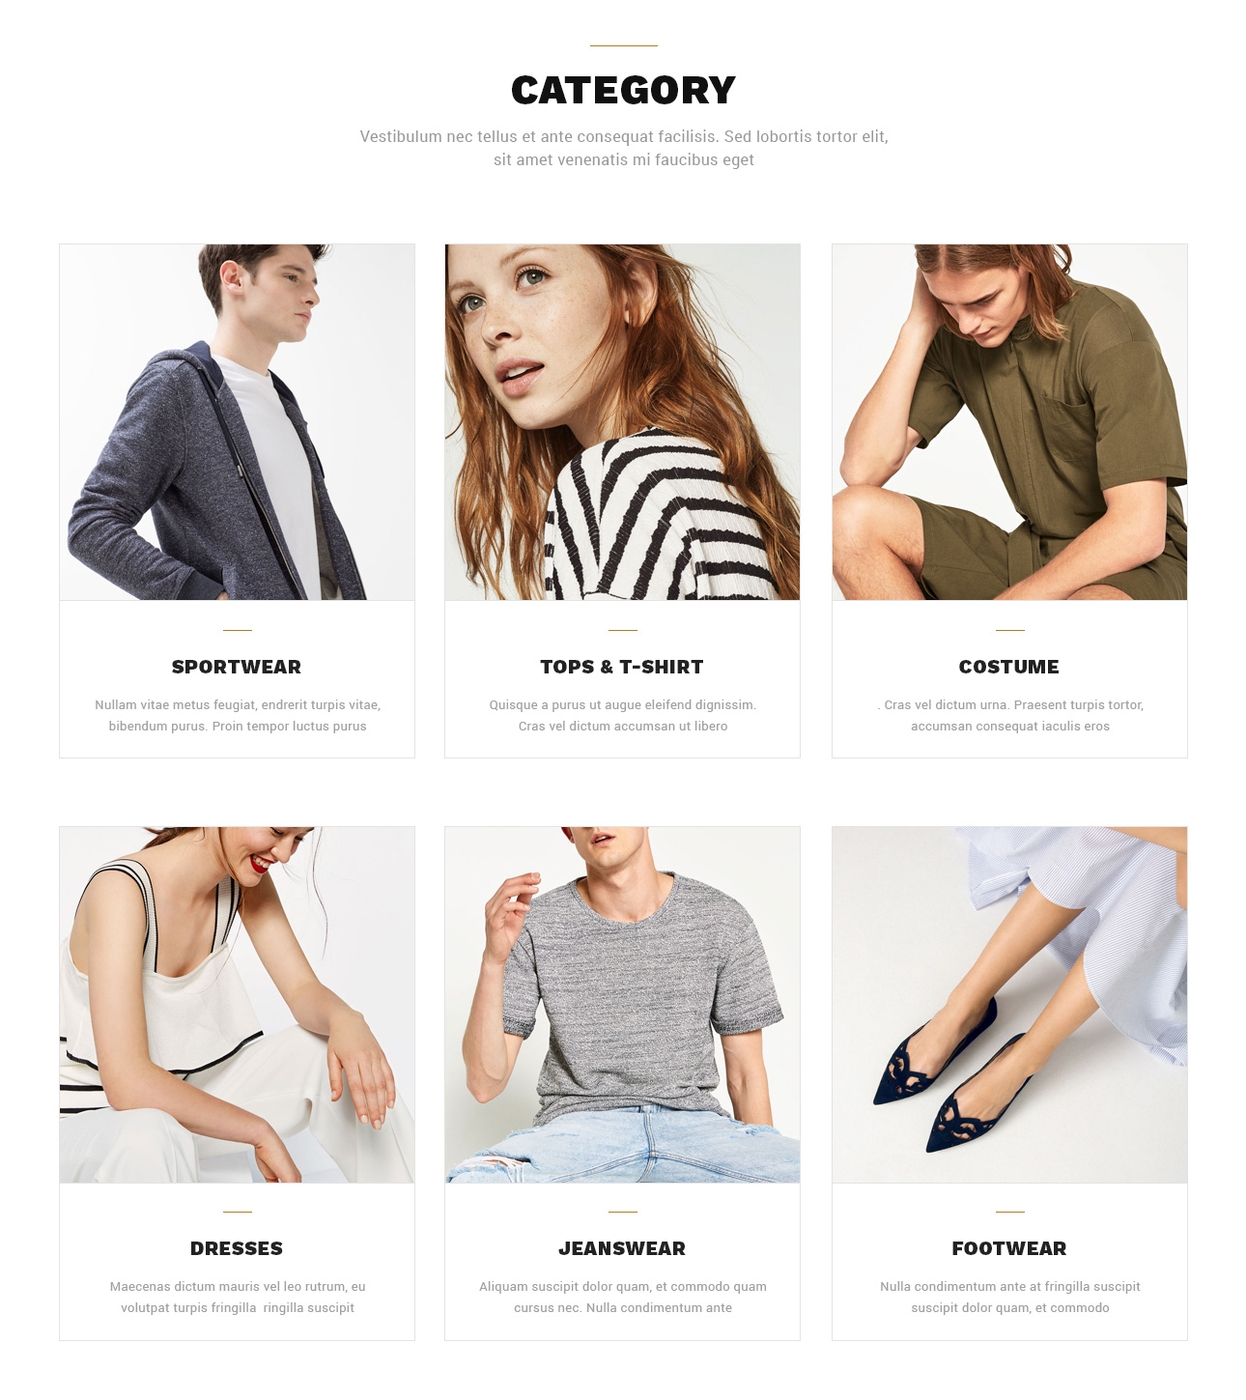 Free Bootstrap Gallery Theme